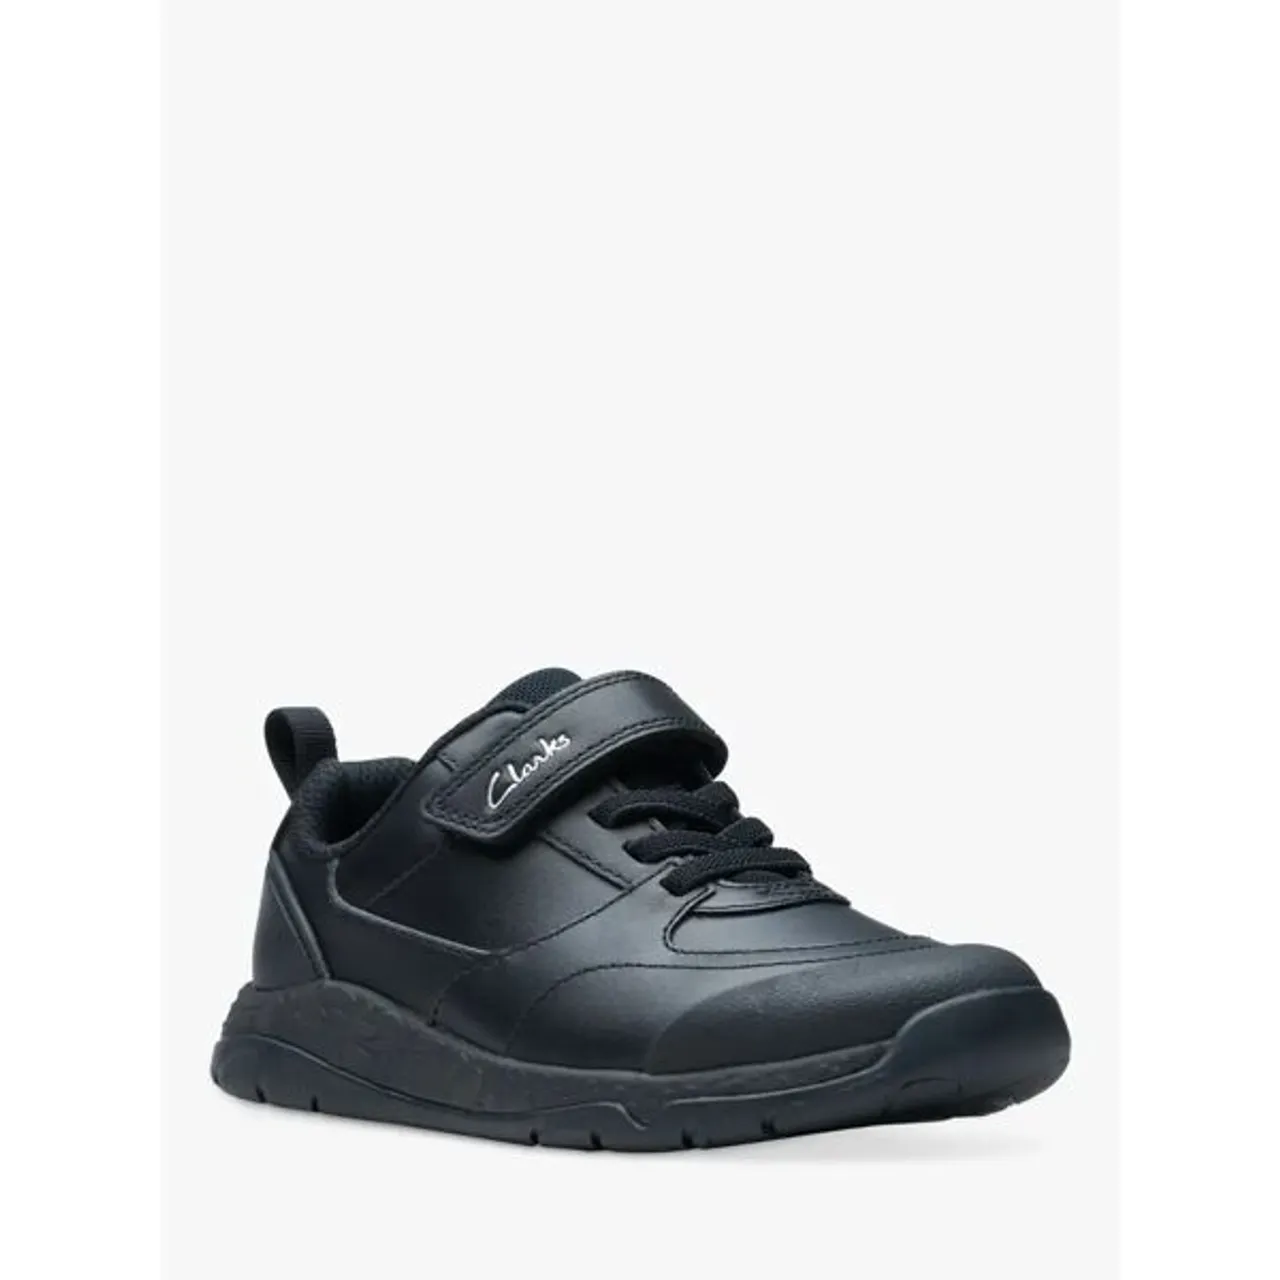 Clarks Kids' Steggy Stride Leather Shoes - Black Leather - Male